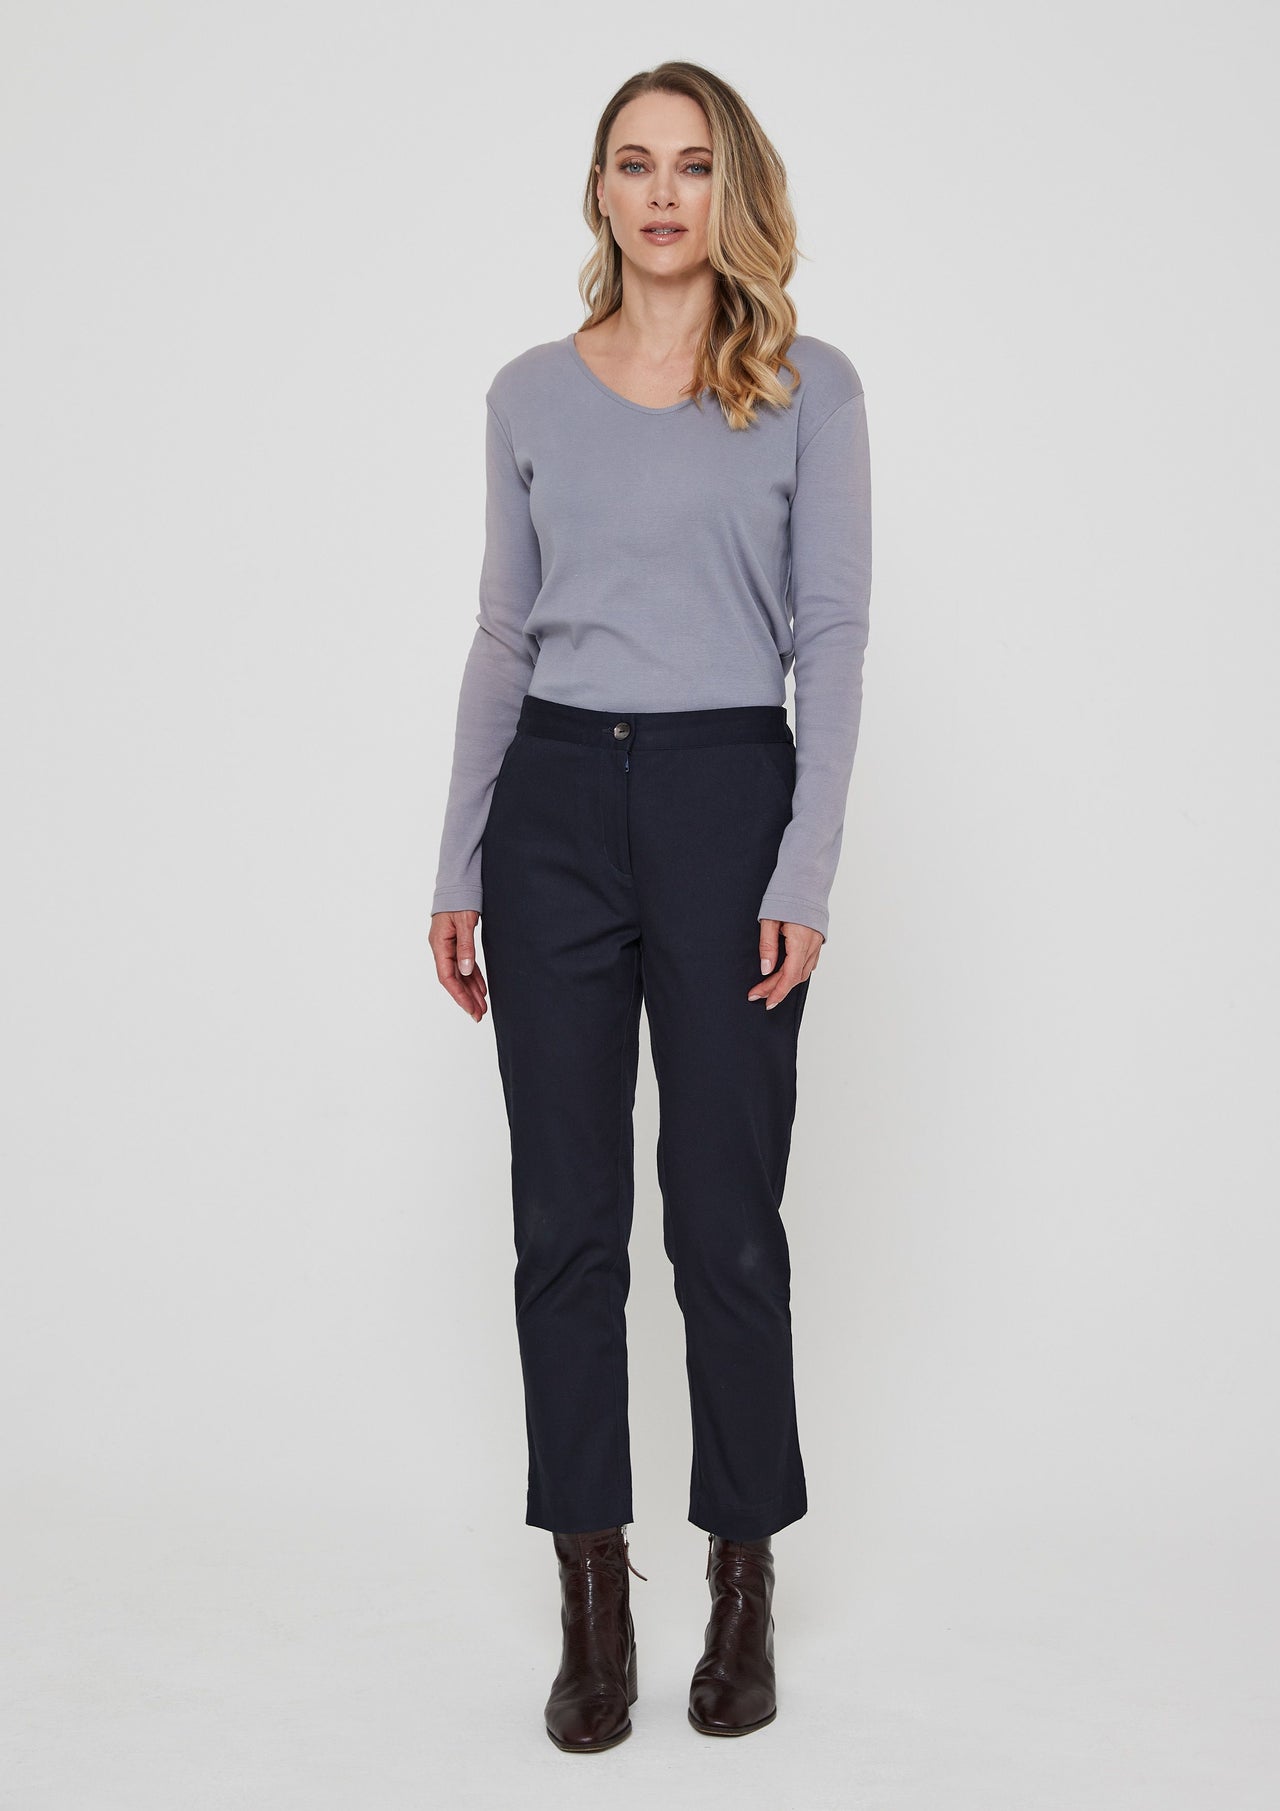 Adini Iris Solid Stretch Cotton Navy Trousers